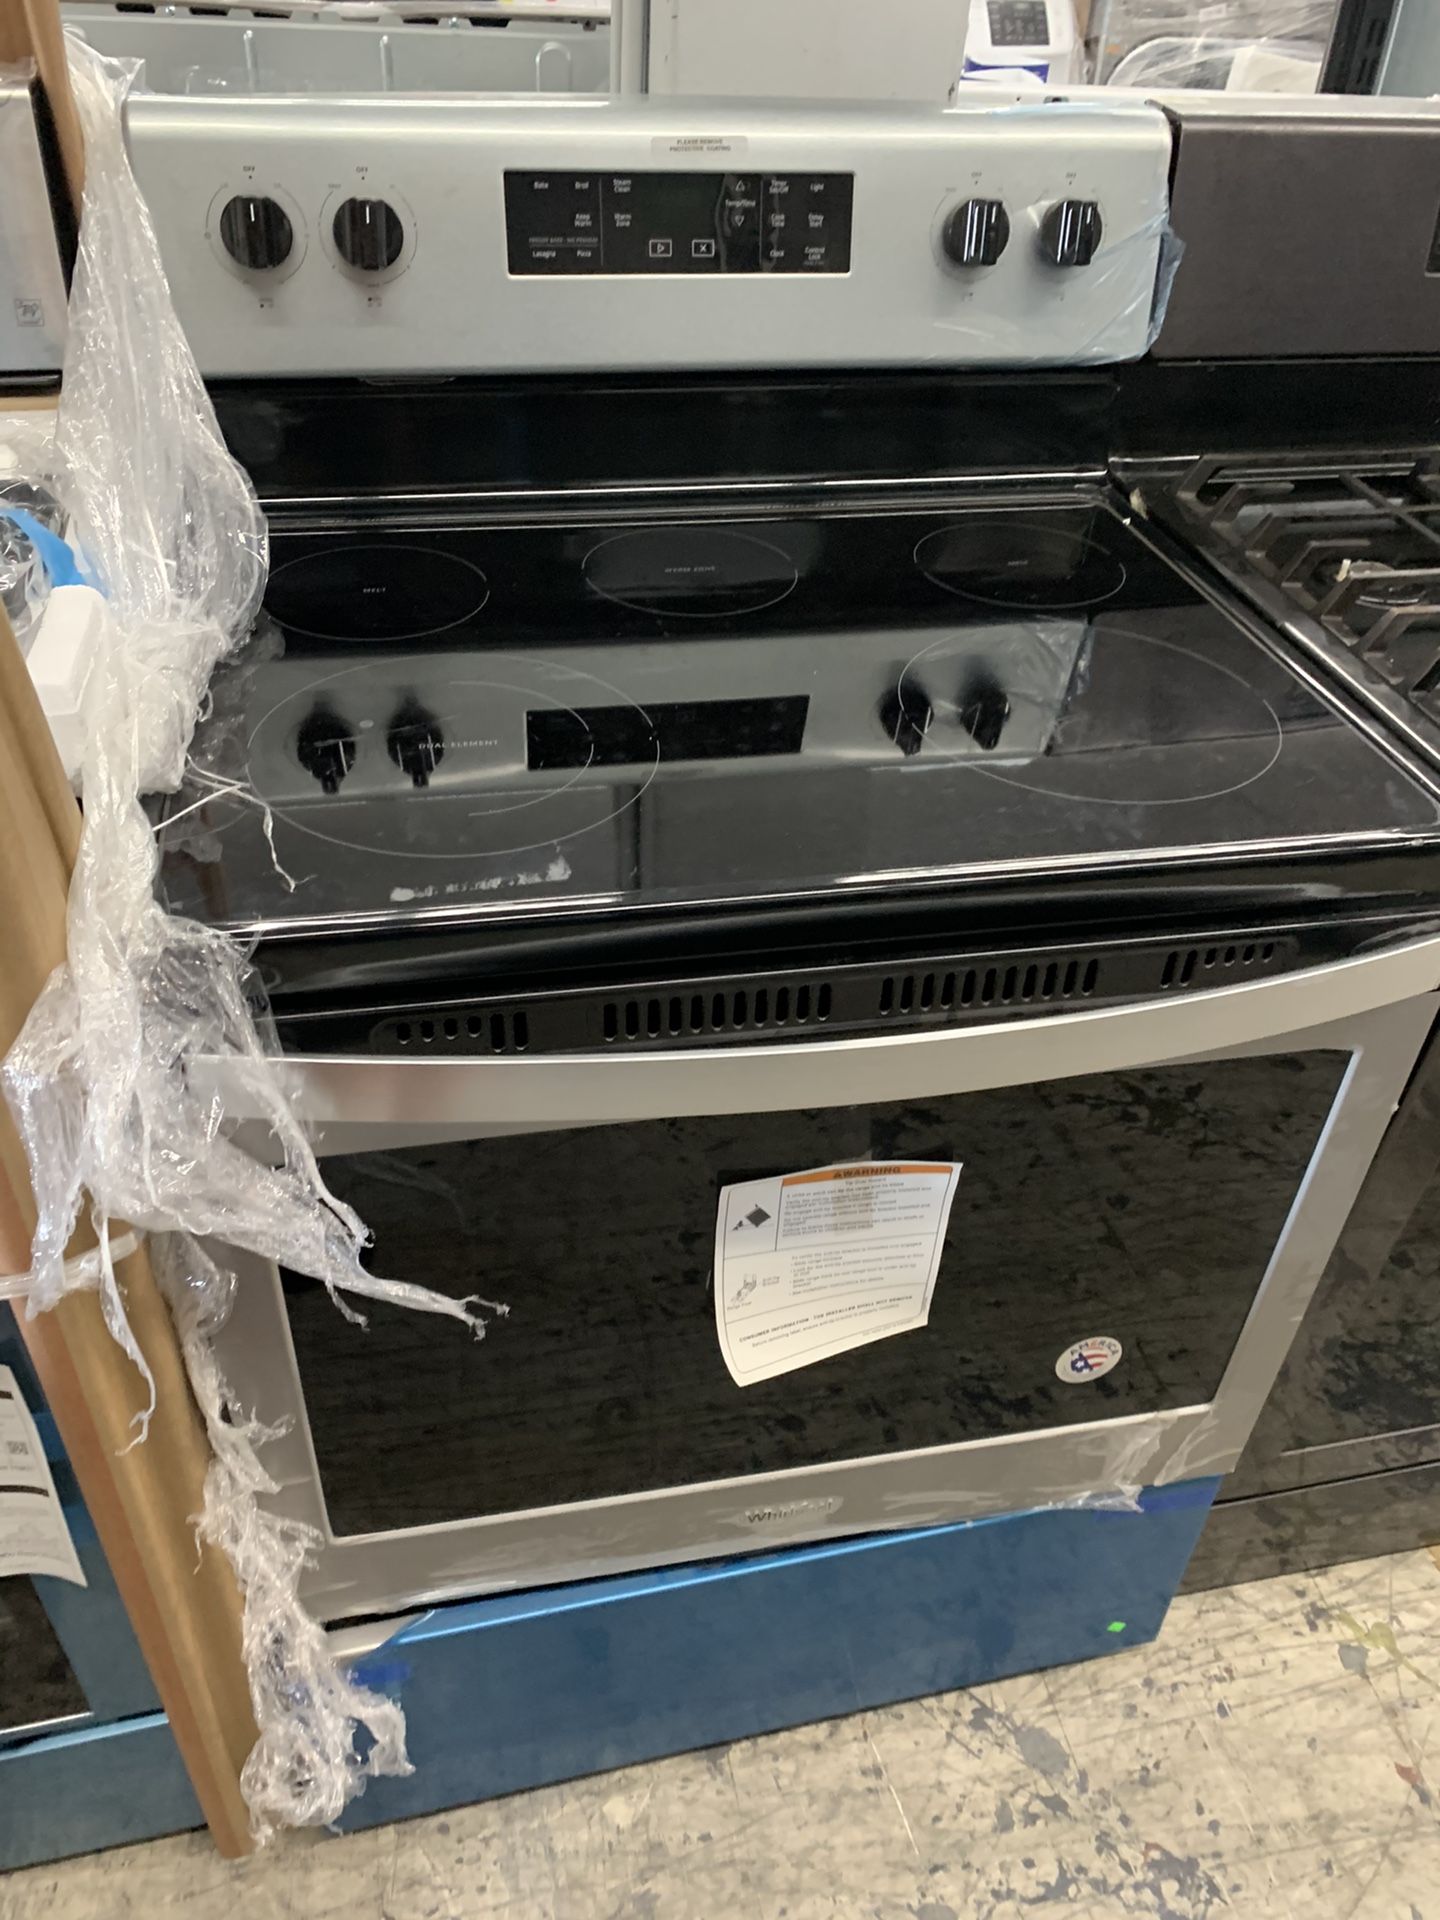 Whirlpool 30” electric stove in stainless steel new open box